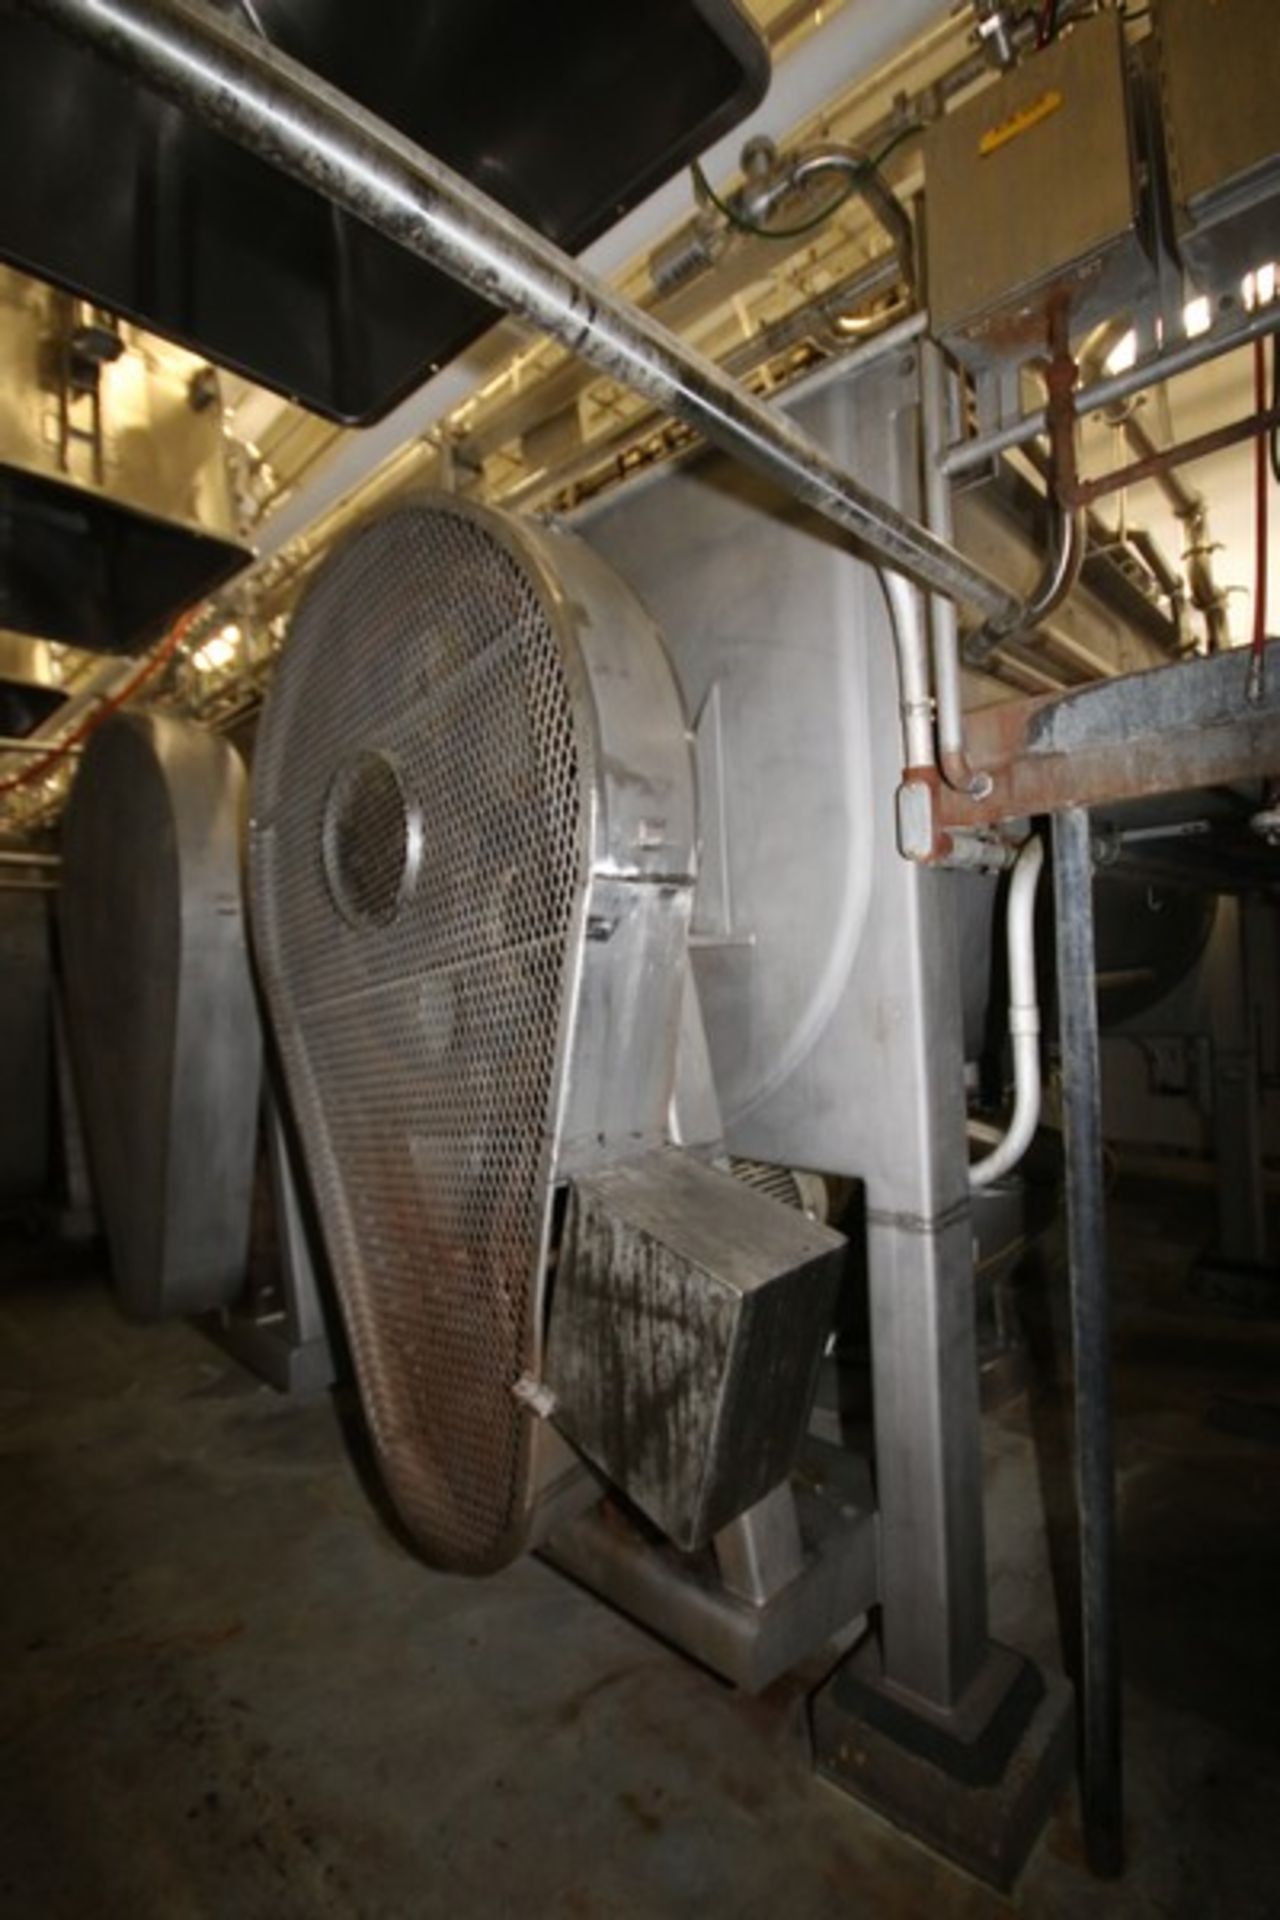 14,000 lb. S/S Ribbon Blender, with 75 hp Motor, 460 Volts, 3 Phase, Internal Blending Compartment - Image 13 of 17